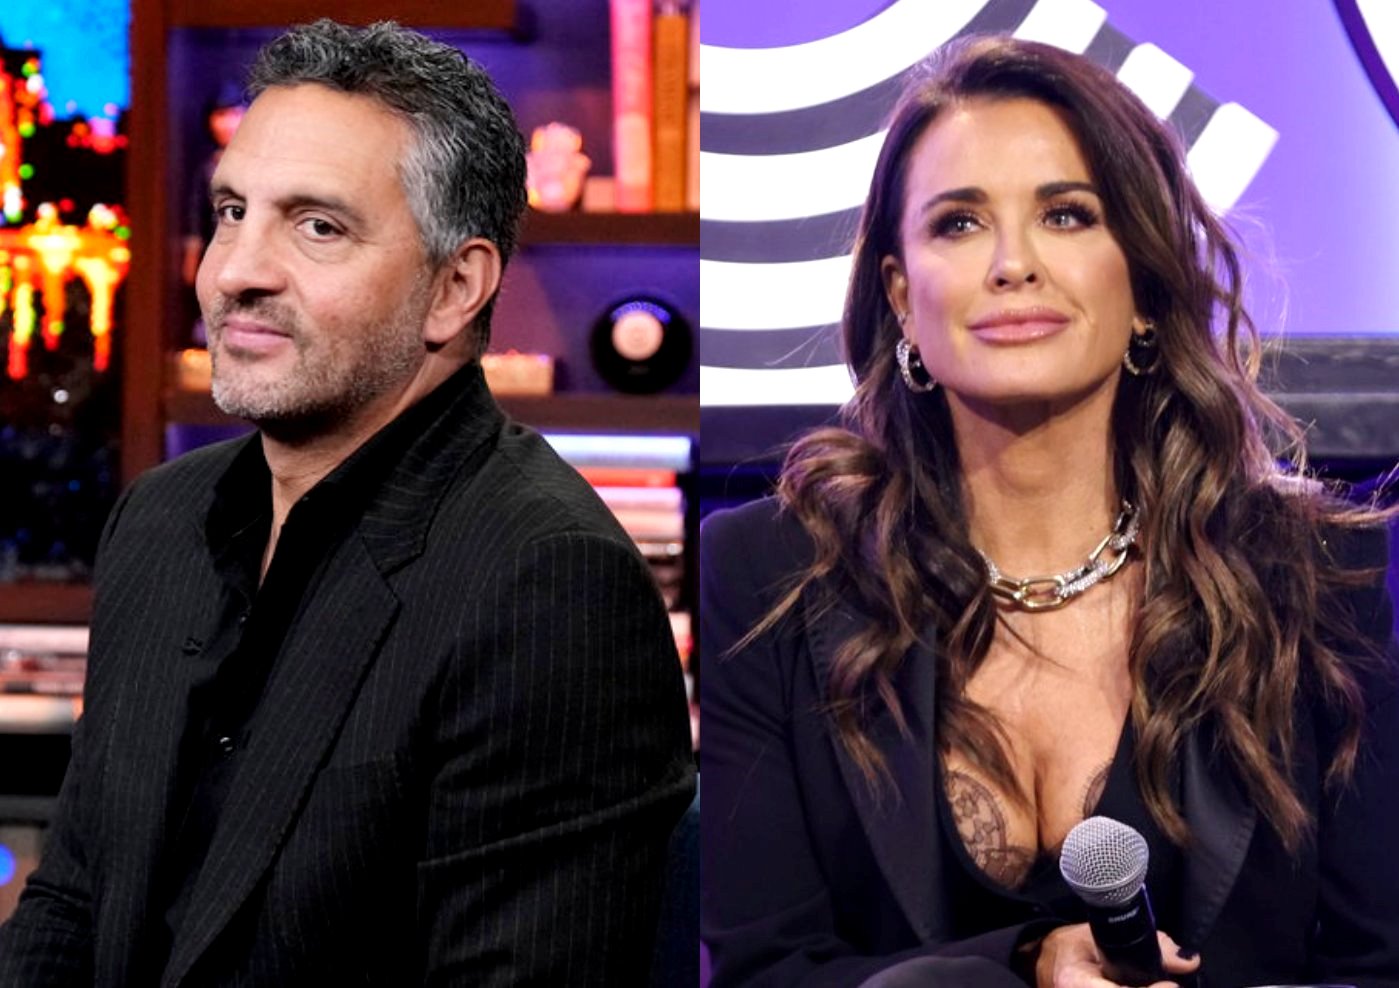 RHOBH's Kyle Richards and Mauricio Umansky Have No Prenup for $100 Million Fortune, Find Out if They've Called Lawyers, Plus Kyle Says She "Misspoke" About "Divorce" Comment & Shares Why She Hid Marital Problems on Show